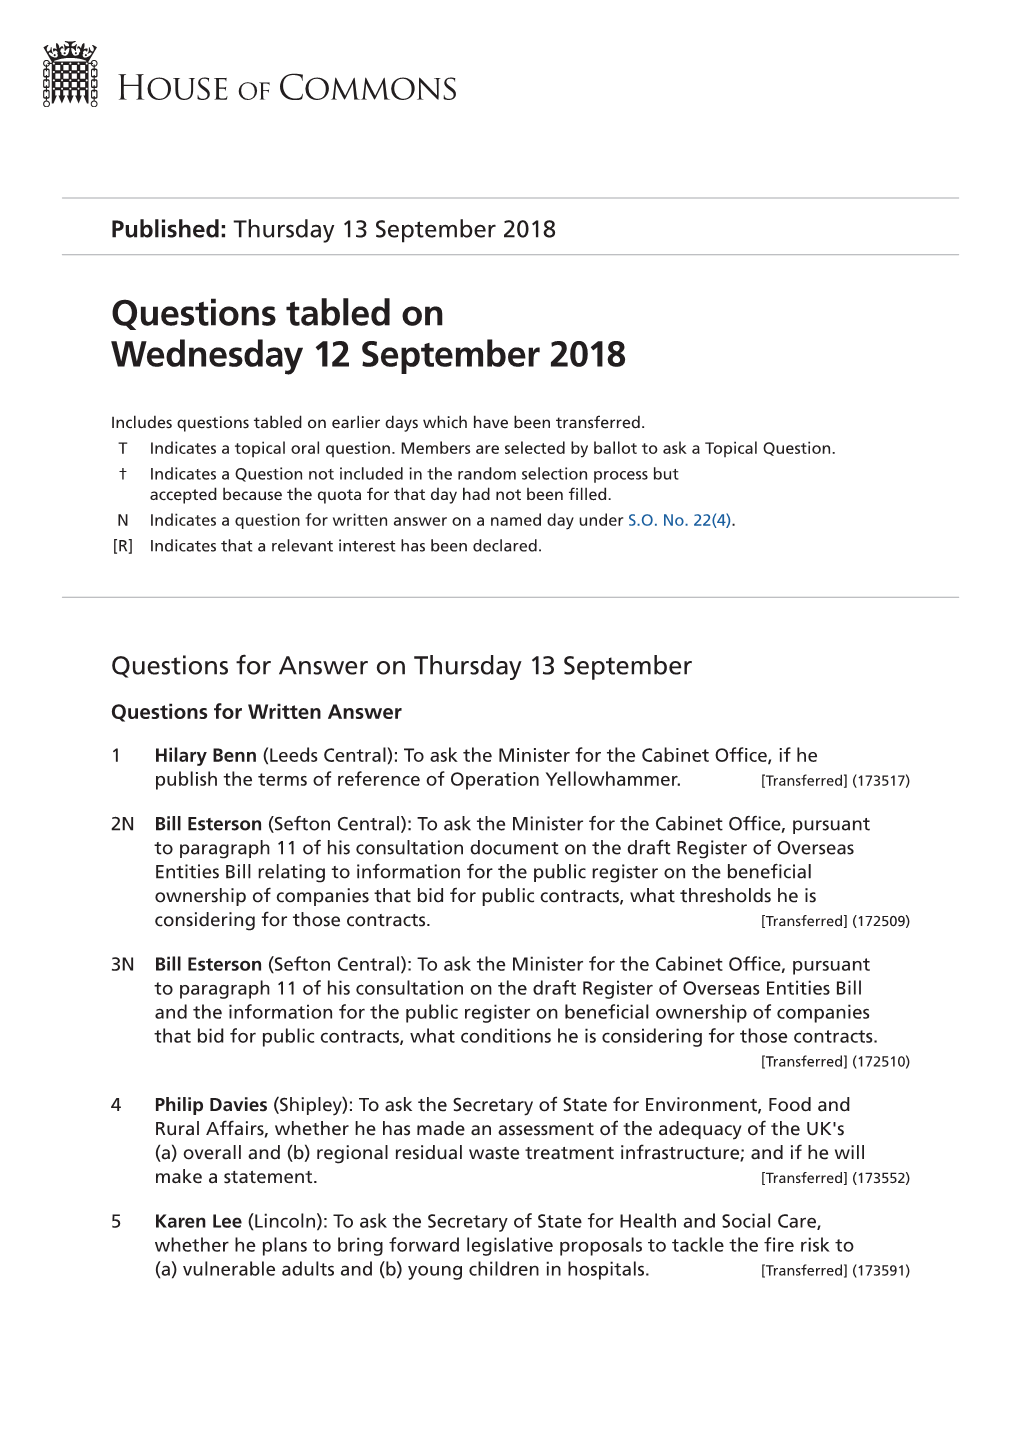 Questions Tabled on Wed 12 Sep 2018